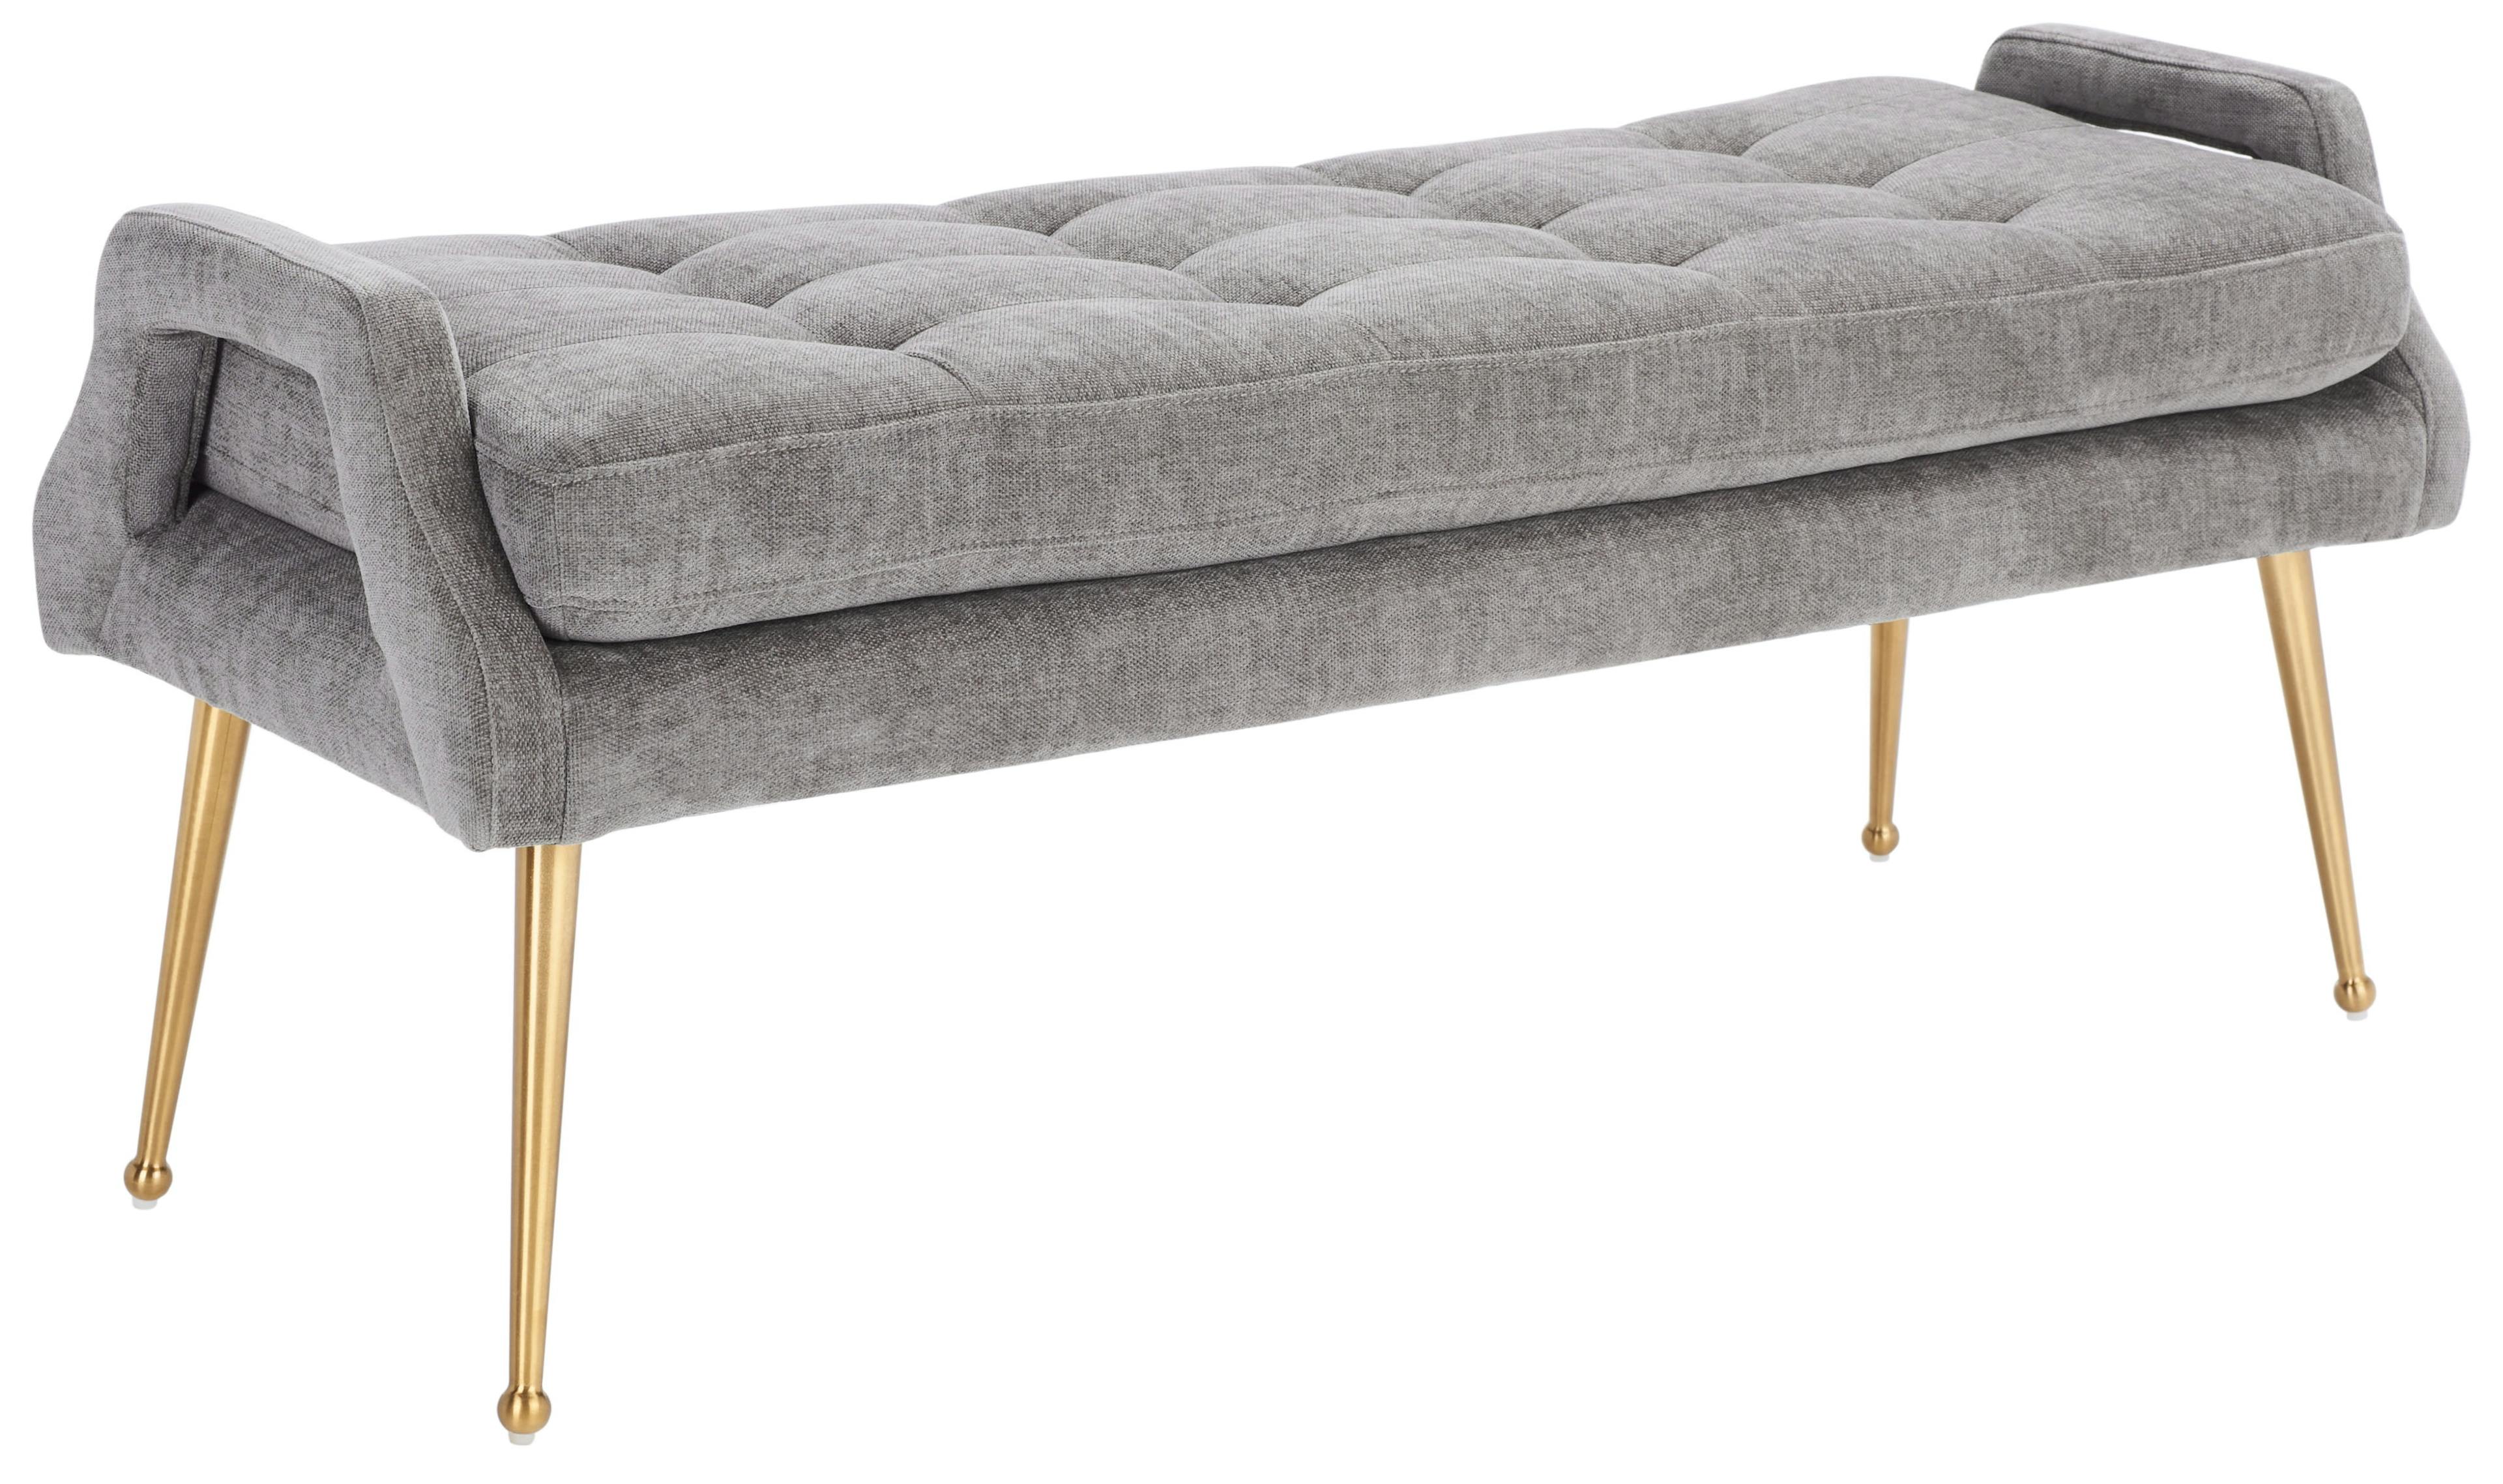 Everdeen Charcoal Tufted Bench with Brushed Gold Legs and Storage